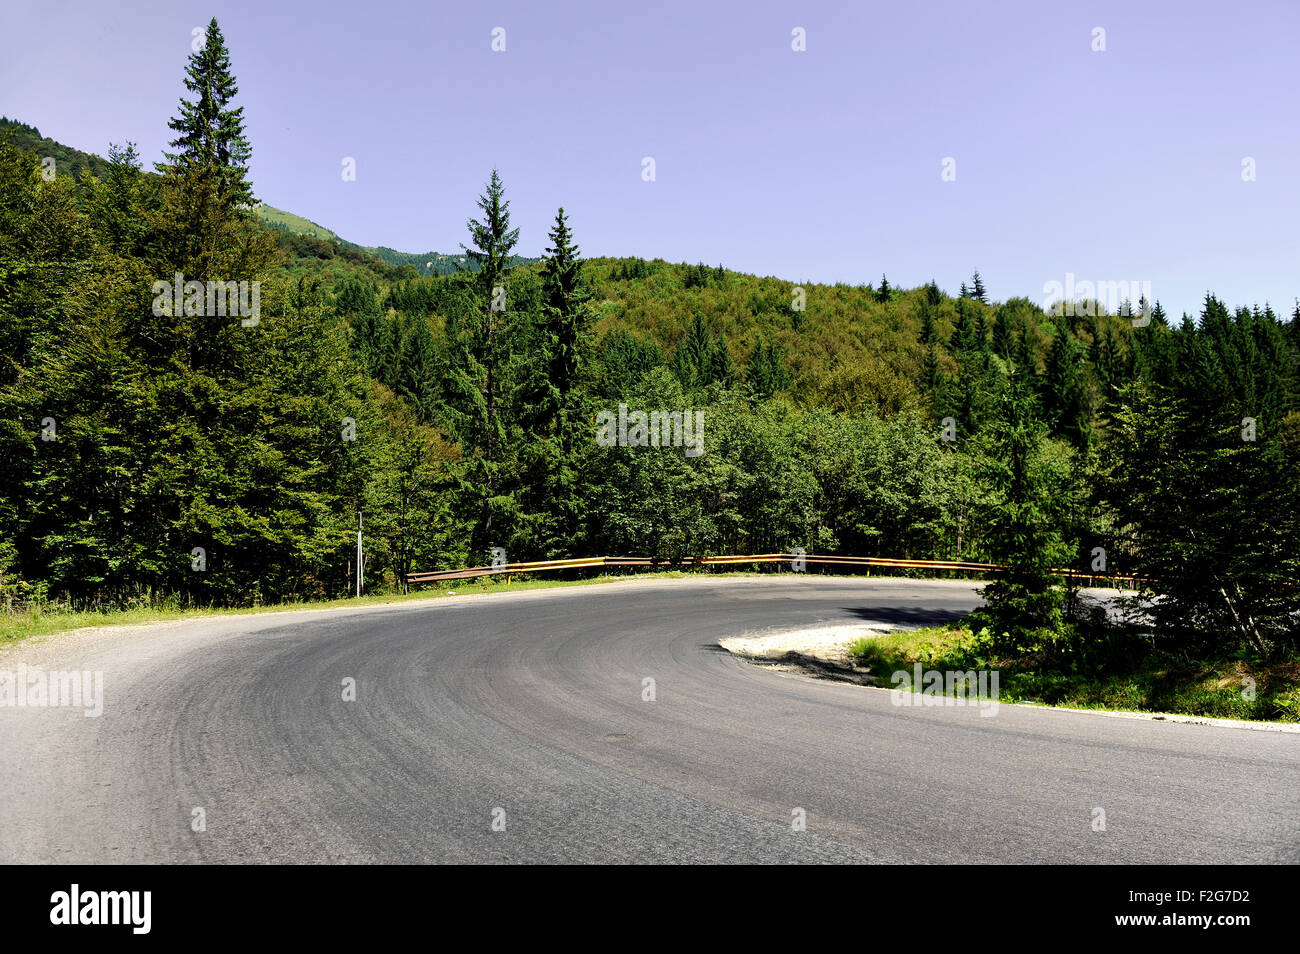 A hairpin turn on an empty mountain road Stock Photo